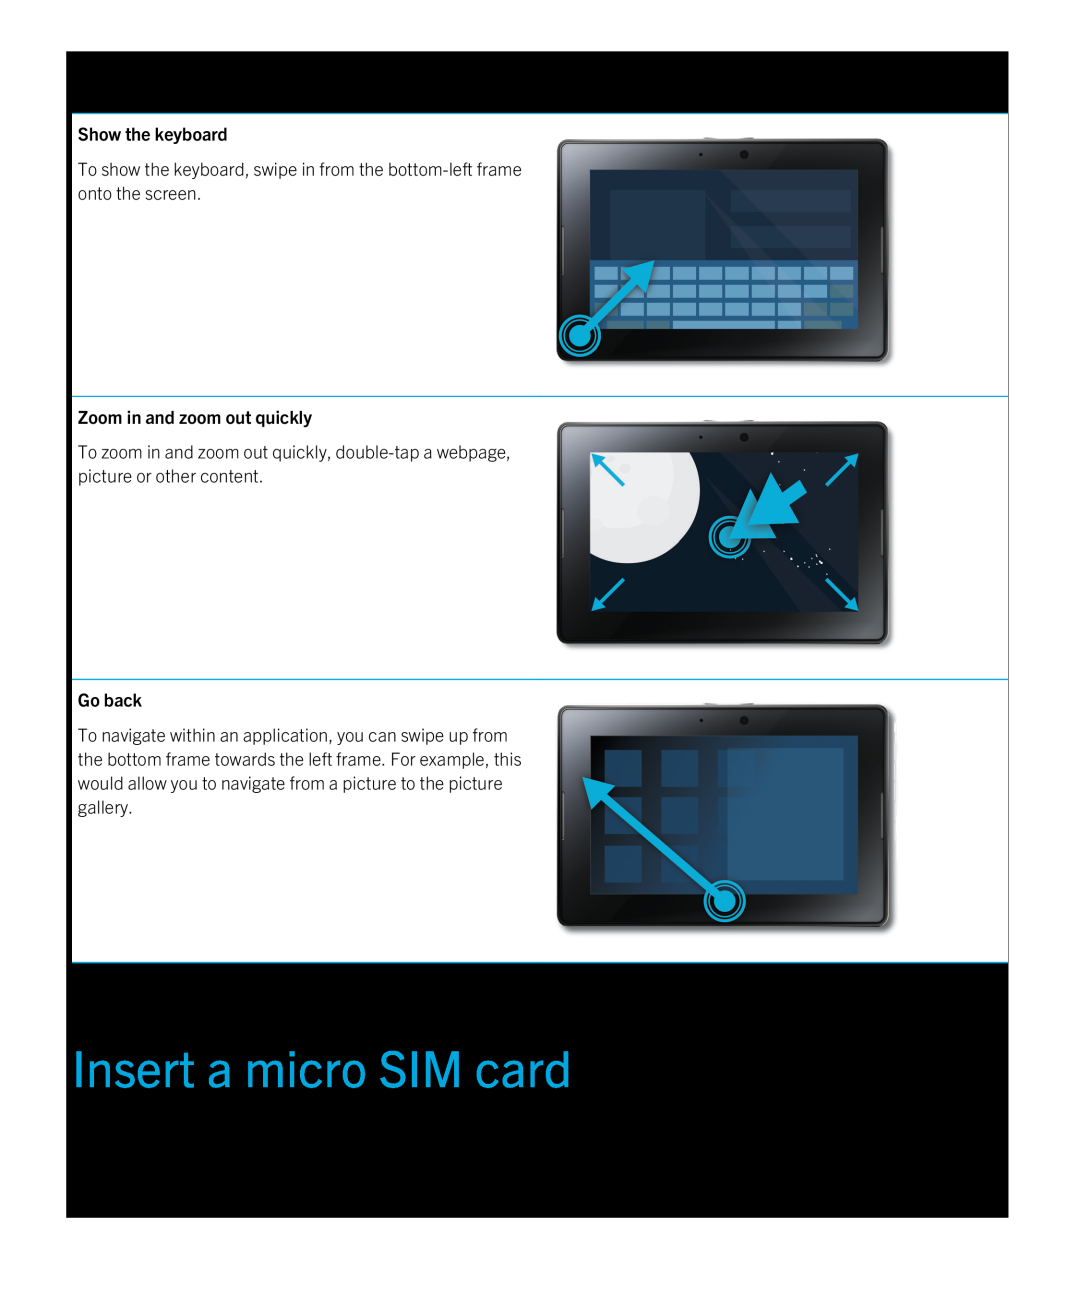 Blackberry 2.0.1 manual Insert a micro SIM card, Show the keyboard, Zoom in and zoom out quickly, Go back 